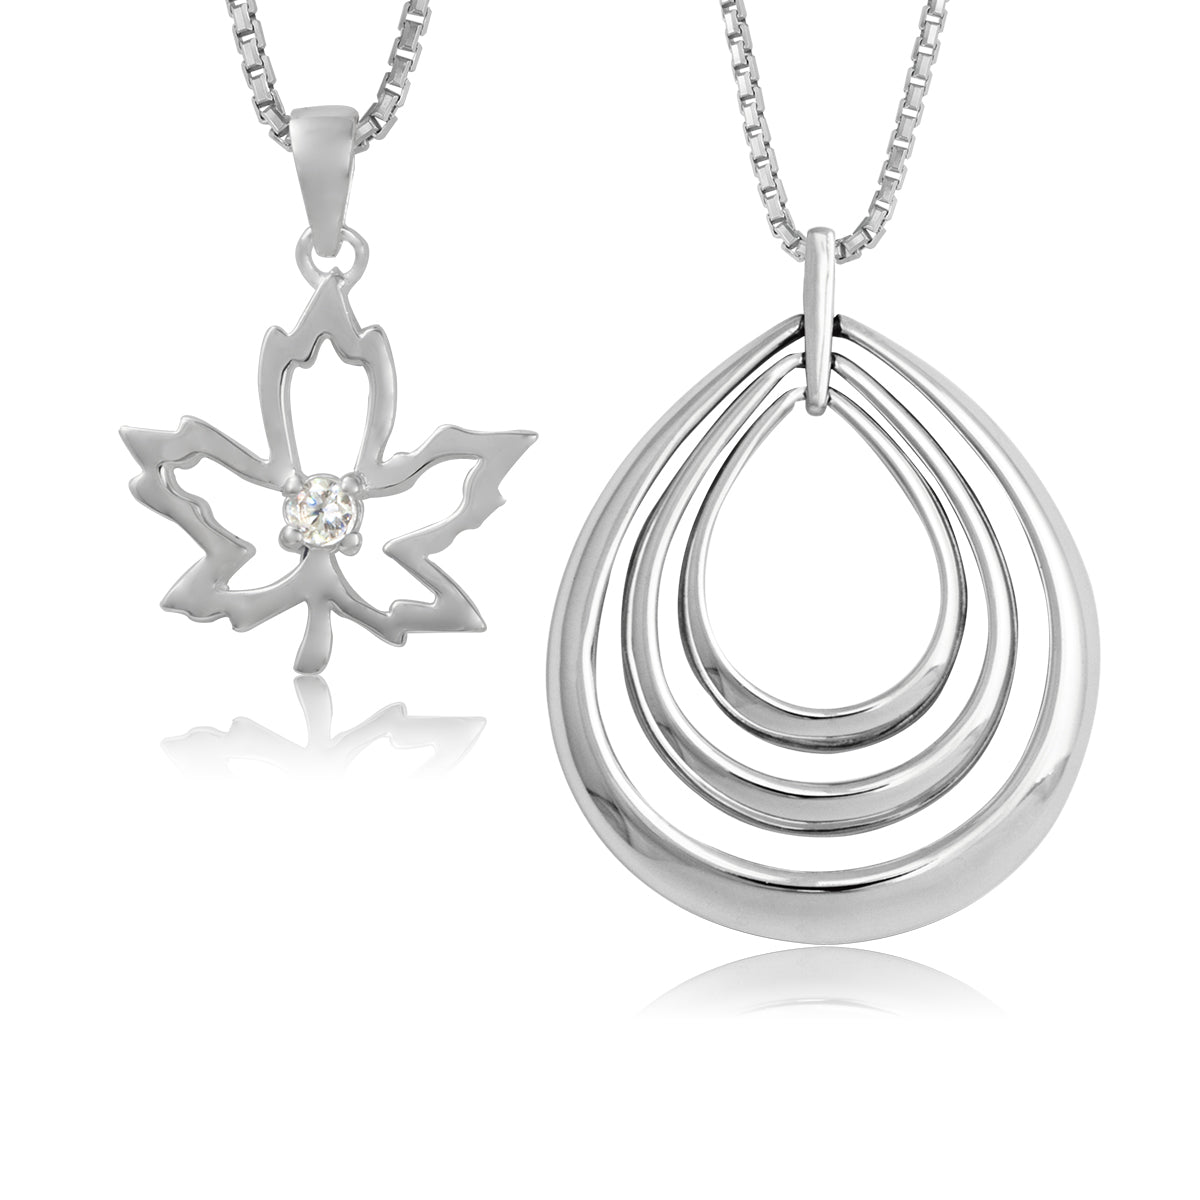 Silver necklaces for women